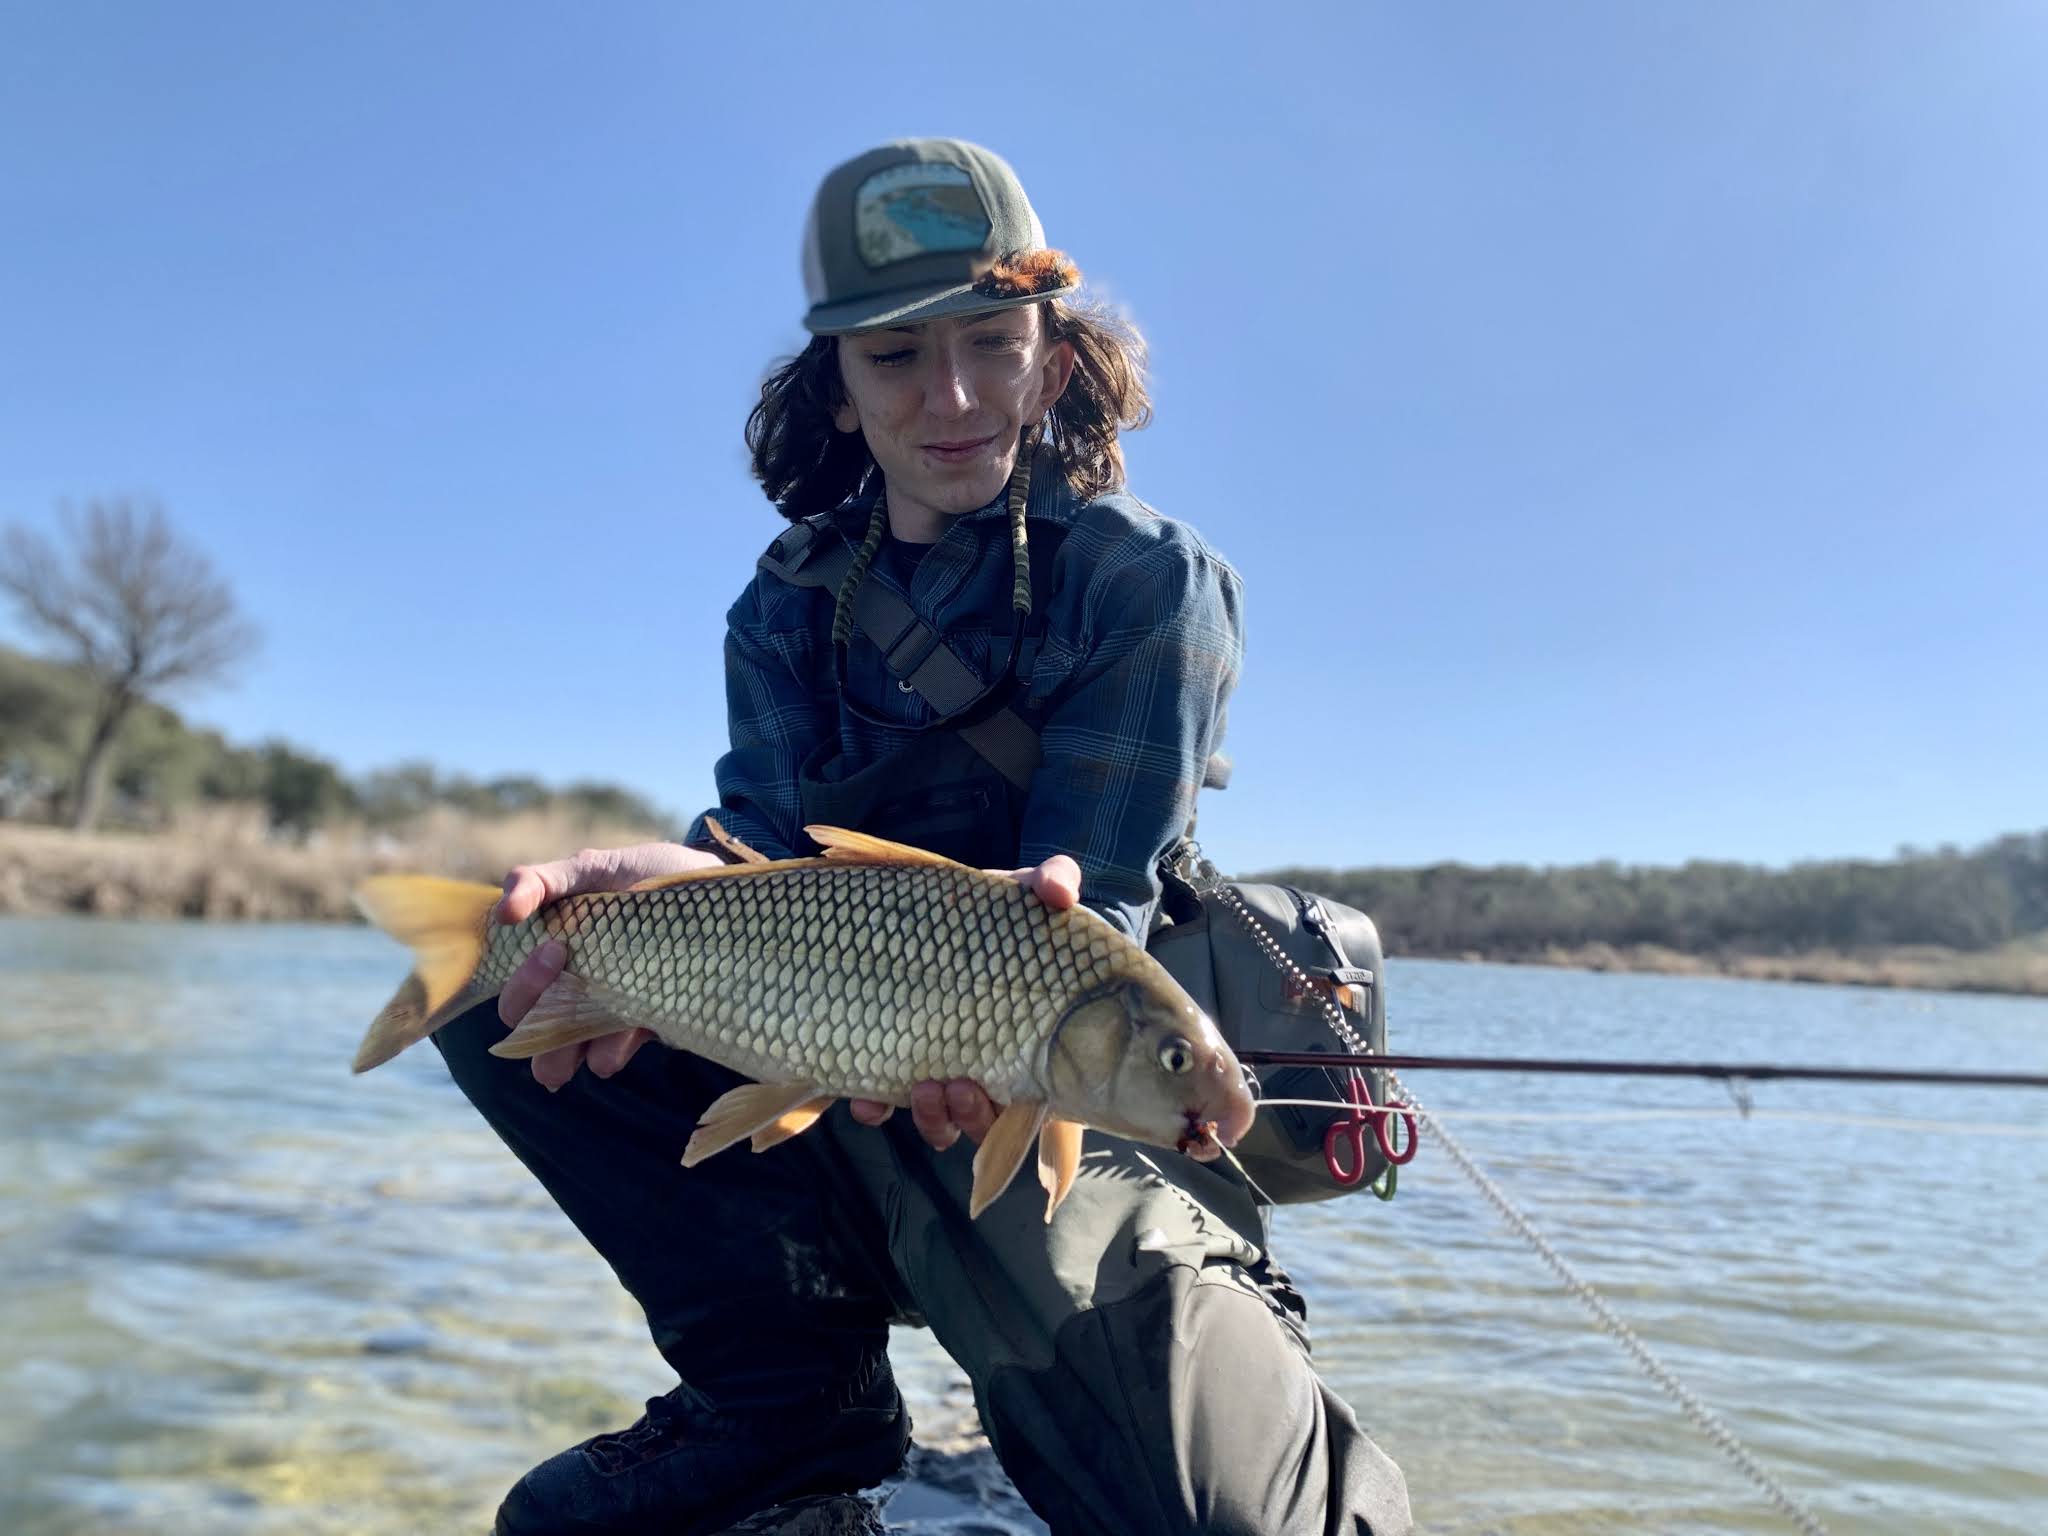 Carp in Texas: Part 4(ish) - Interview with Gabe Cross